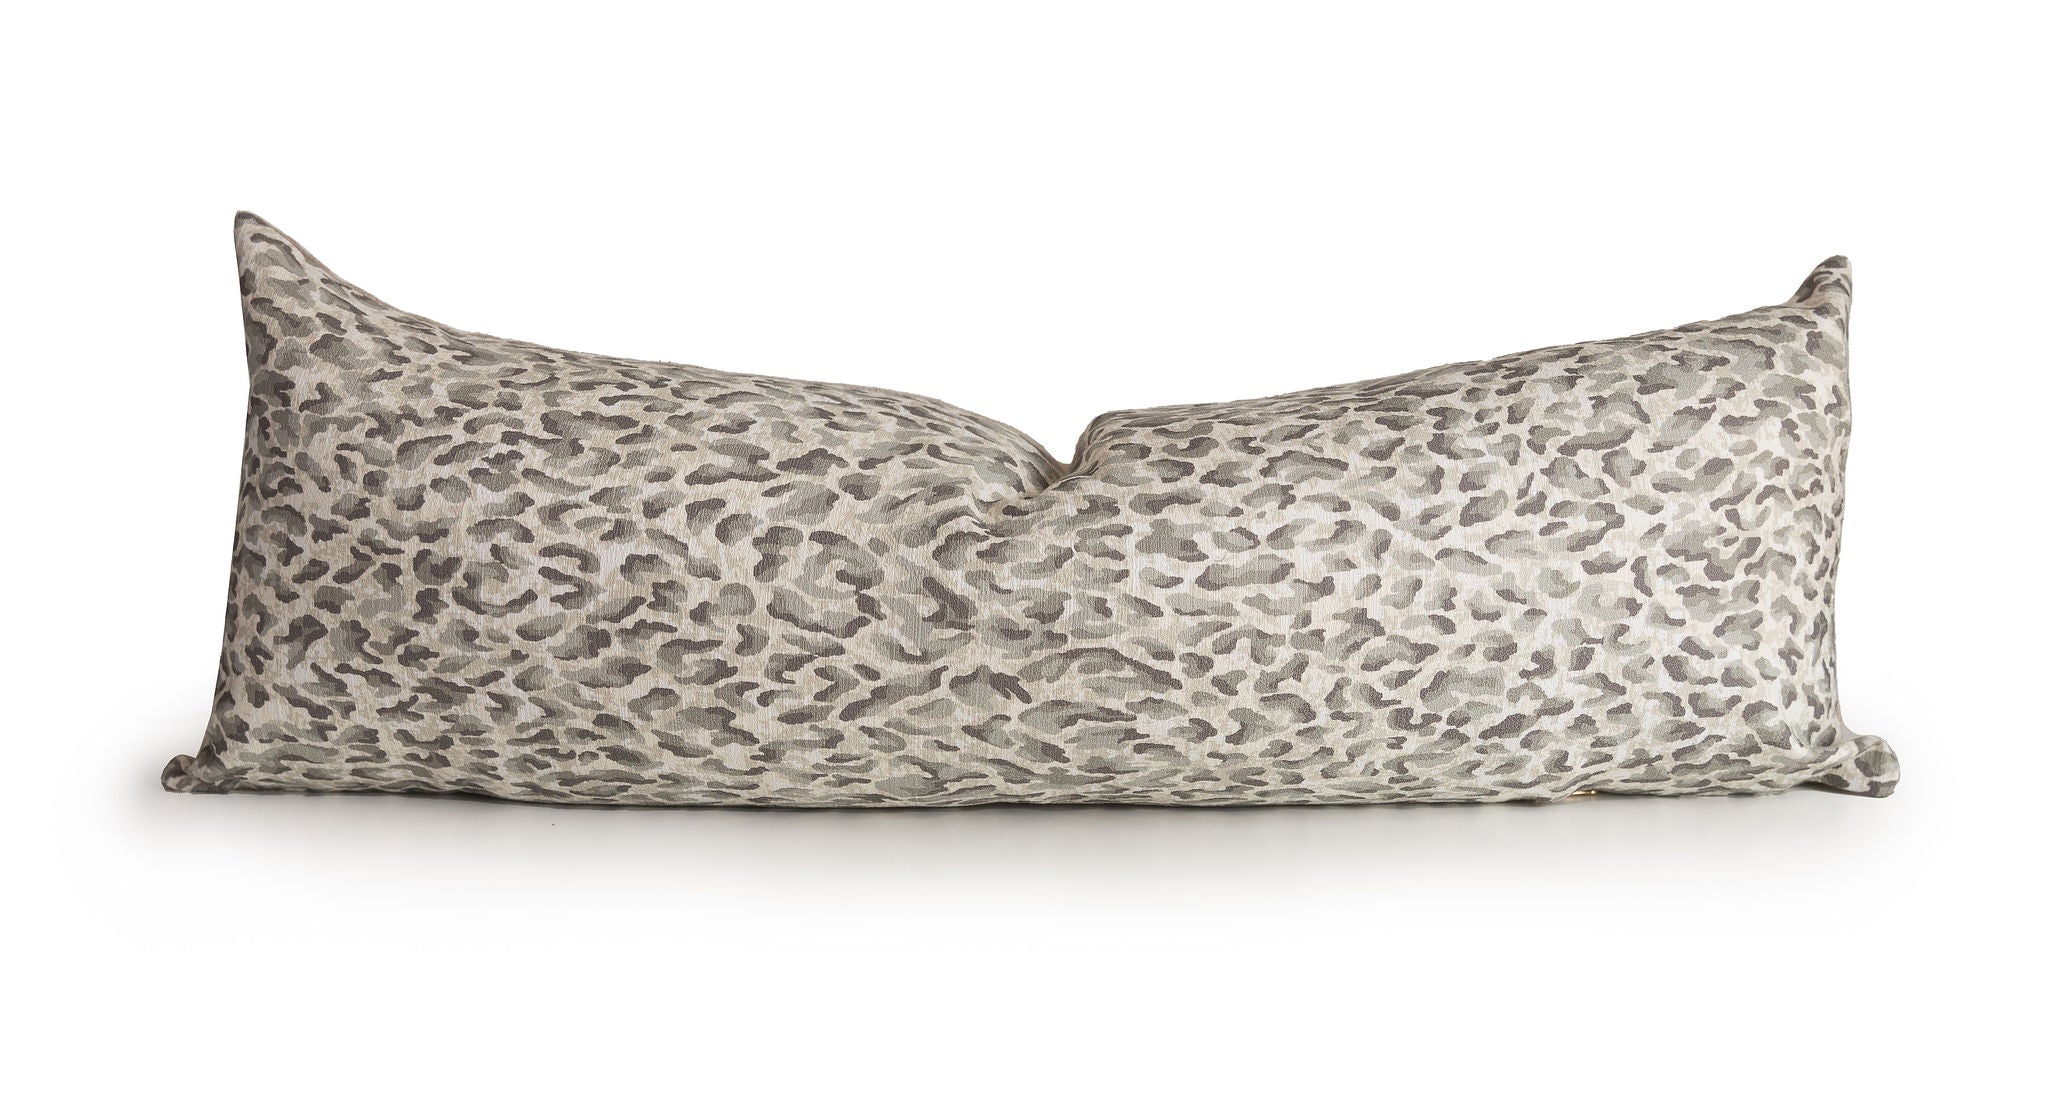 Grey Leopard Print Throw Pillow, Neutral Animal Couch Accent